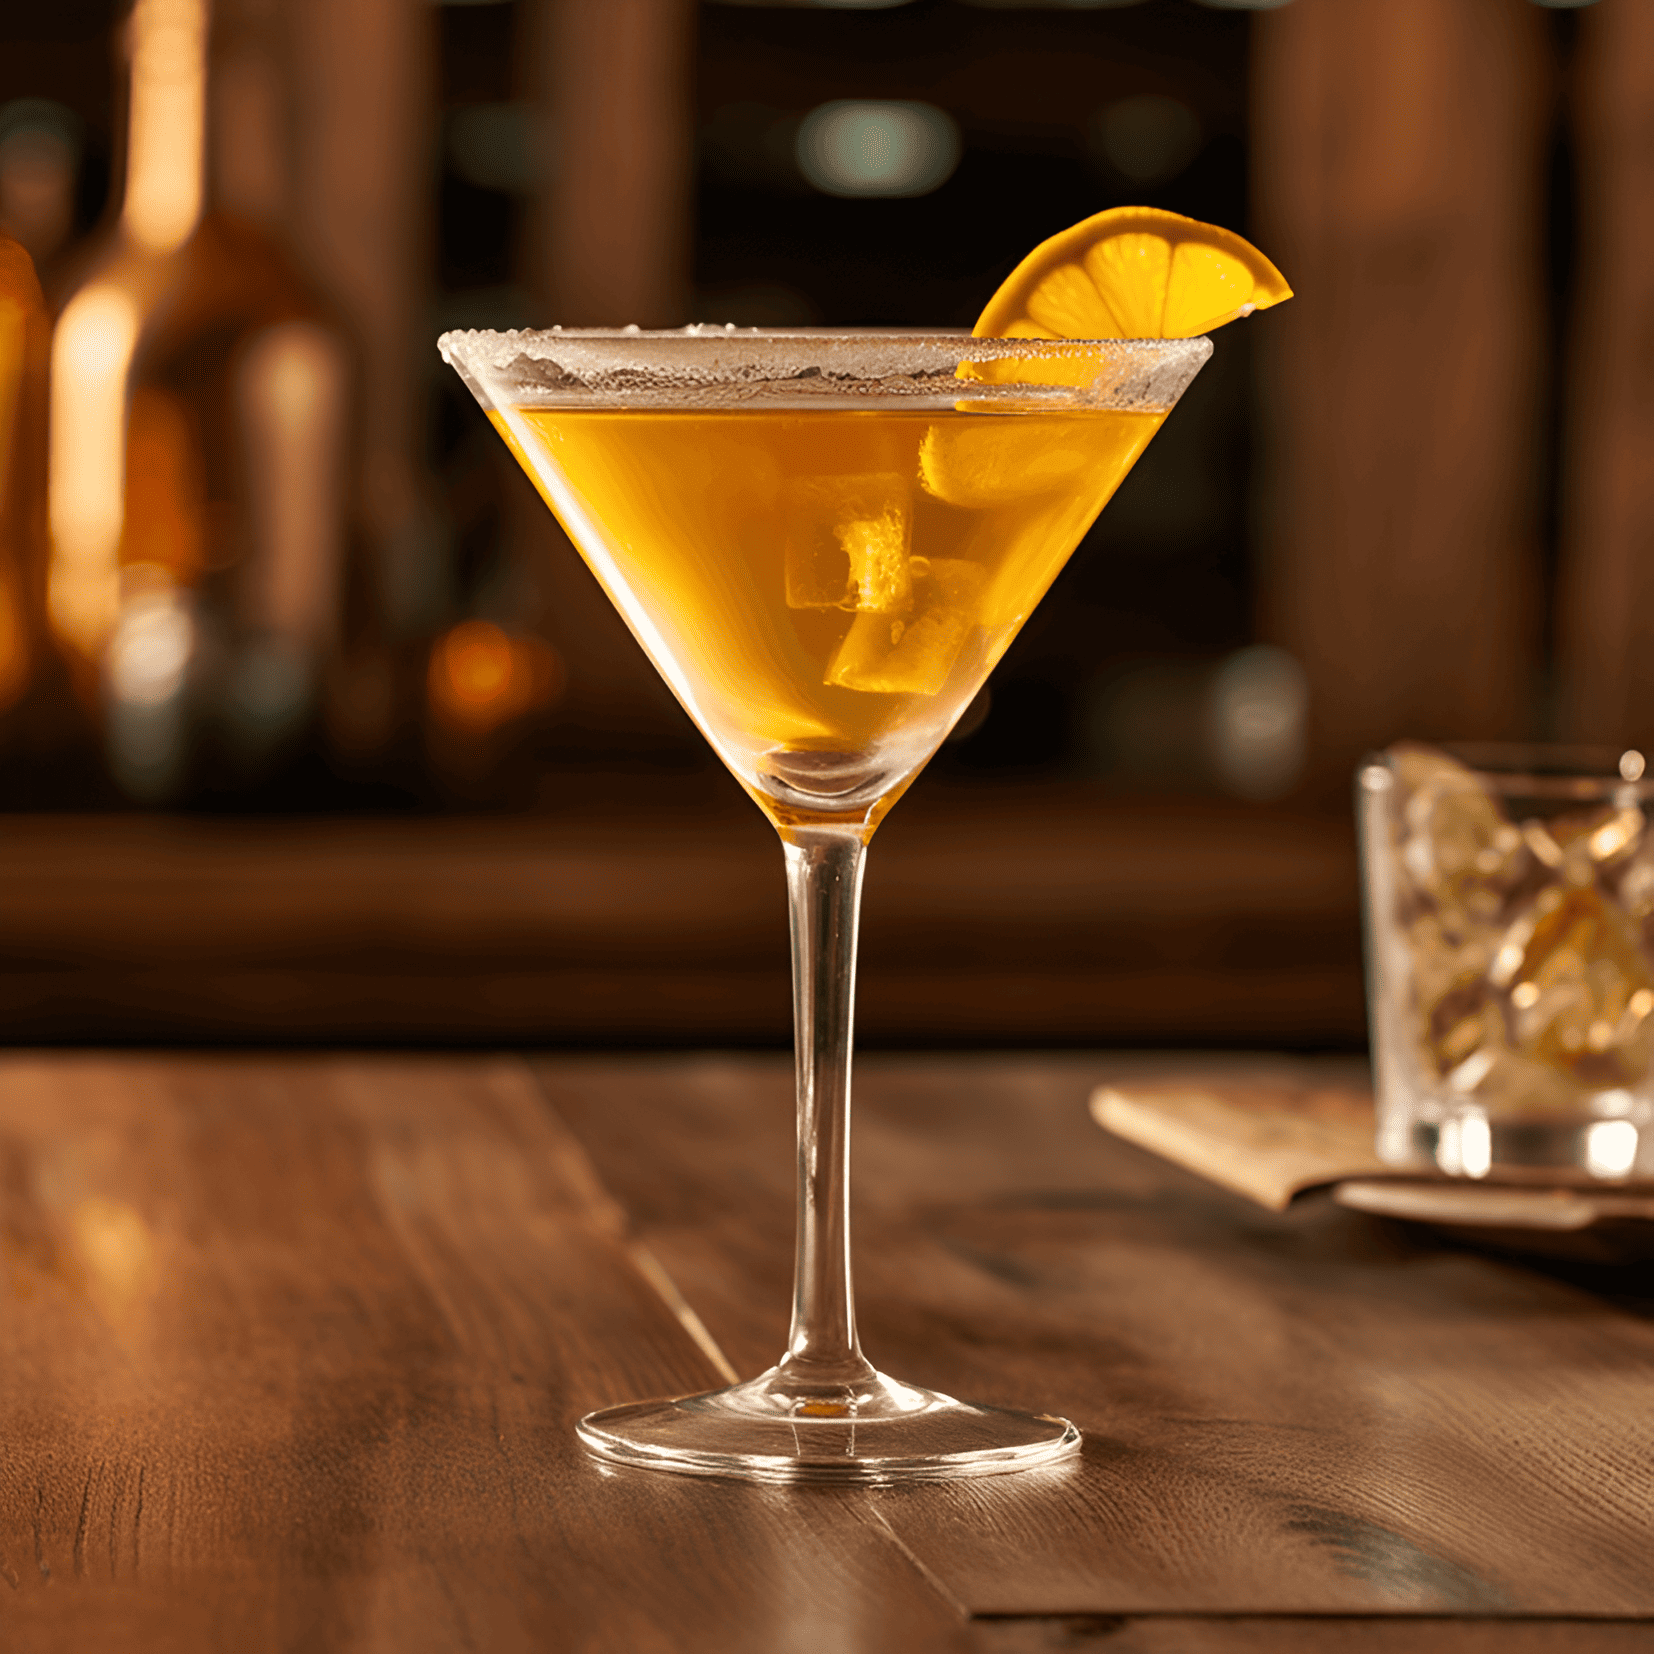 Monterey Cocktail Recipe - The Monterey cocktail offers a delightful balance of sweet, sour, and bitter flavors. Its taste is characterized by the smooth and slightly sweet notes of bourbon, the tangy and refreshing taste of lemon juice, and the subtle bitterness of orange liqueur. The cocktail is both strong and smooth, with a lingering warmth from the bourbon.